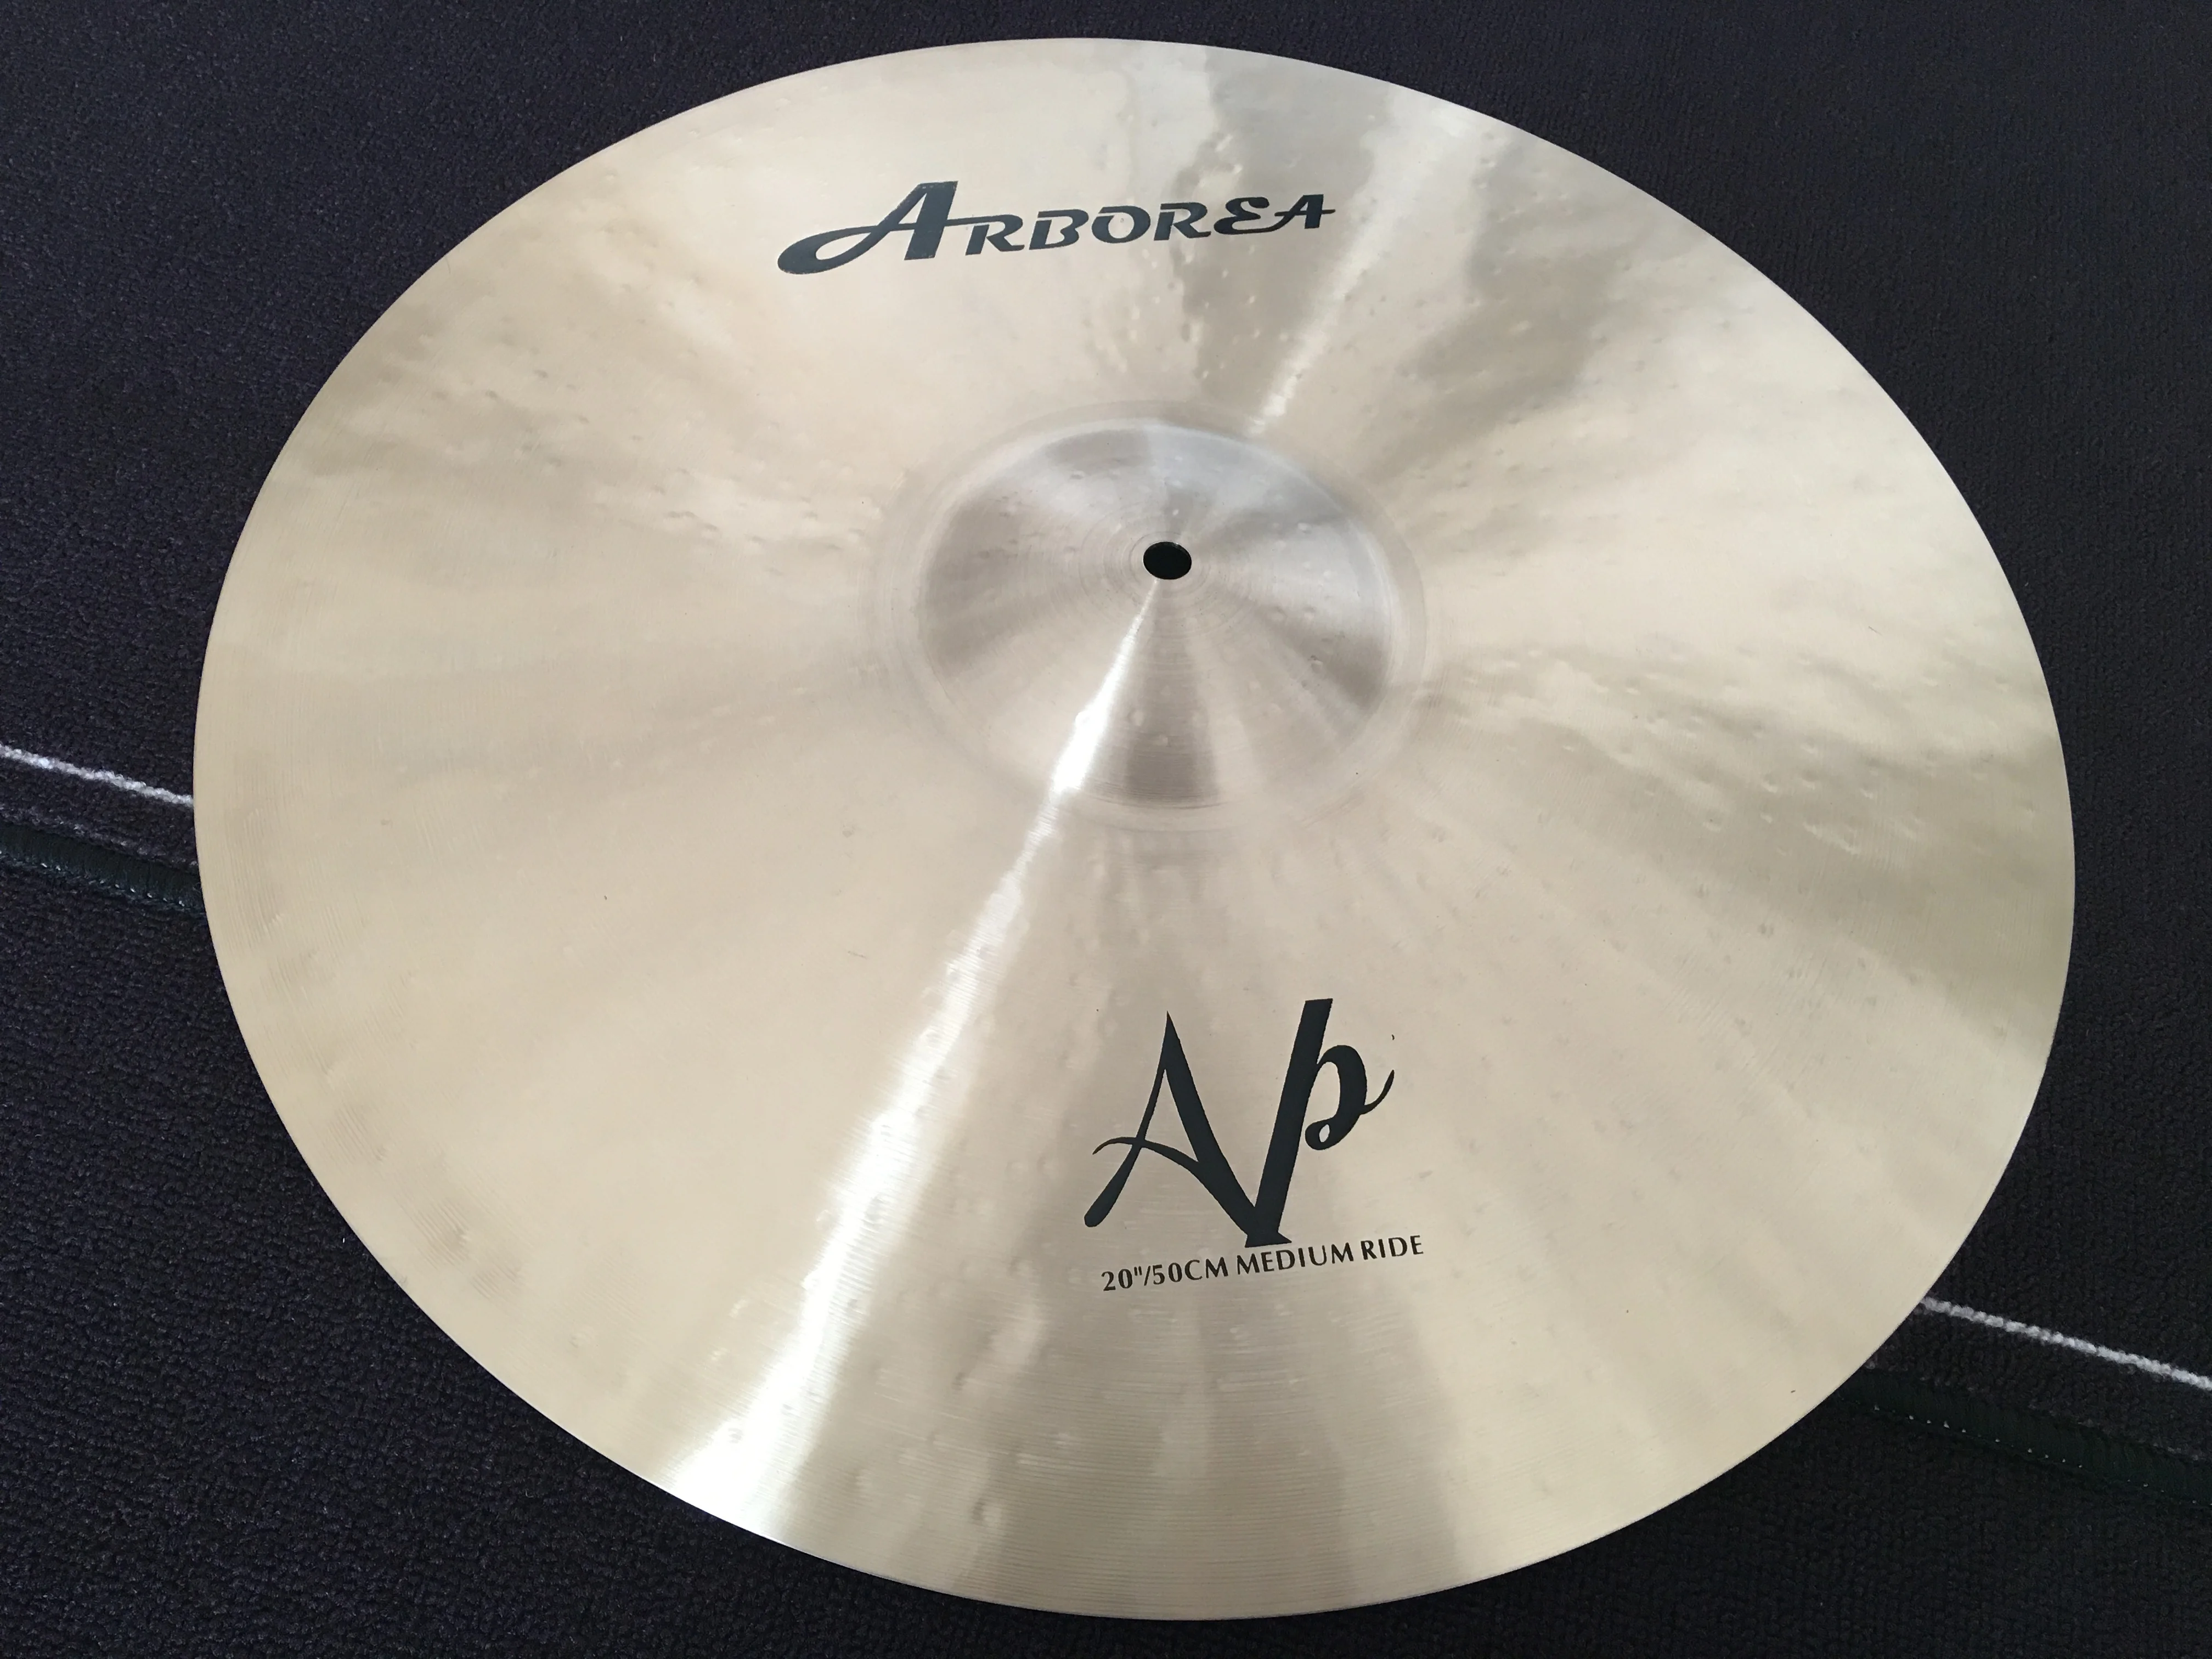 

Arborea B20 Cymbal AP 20 inch medium ride Professional cymbal piece for drummer Professional performance special cymbals